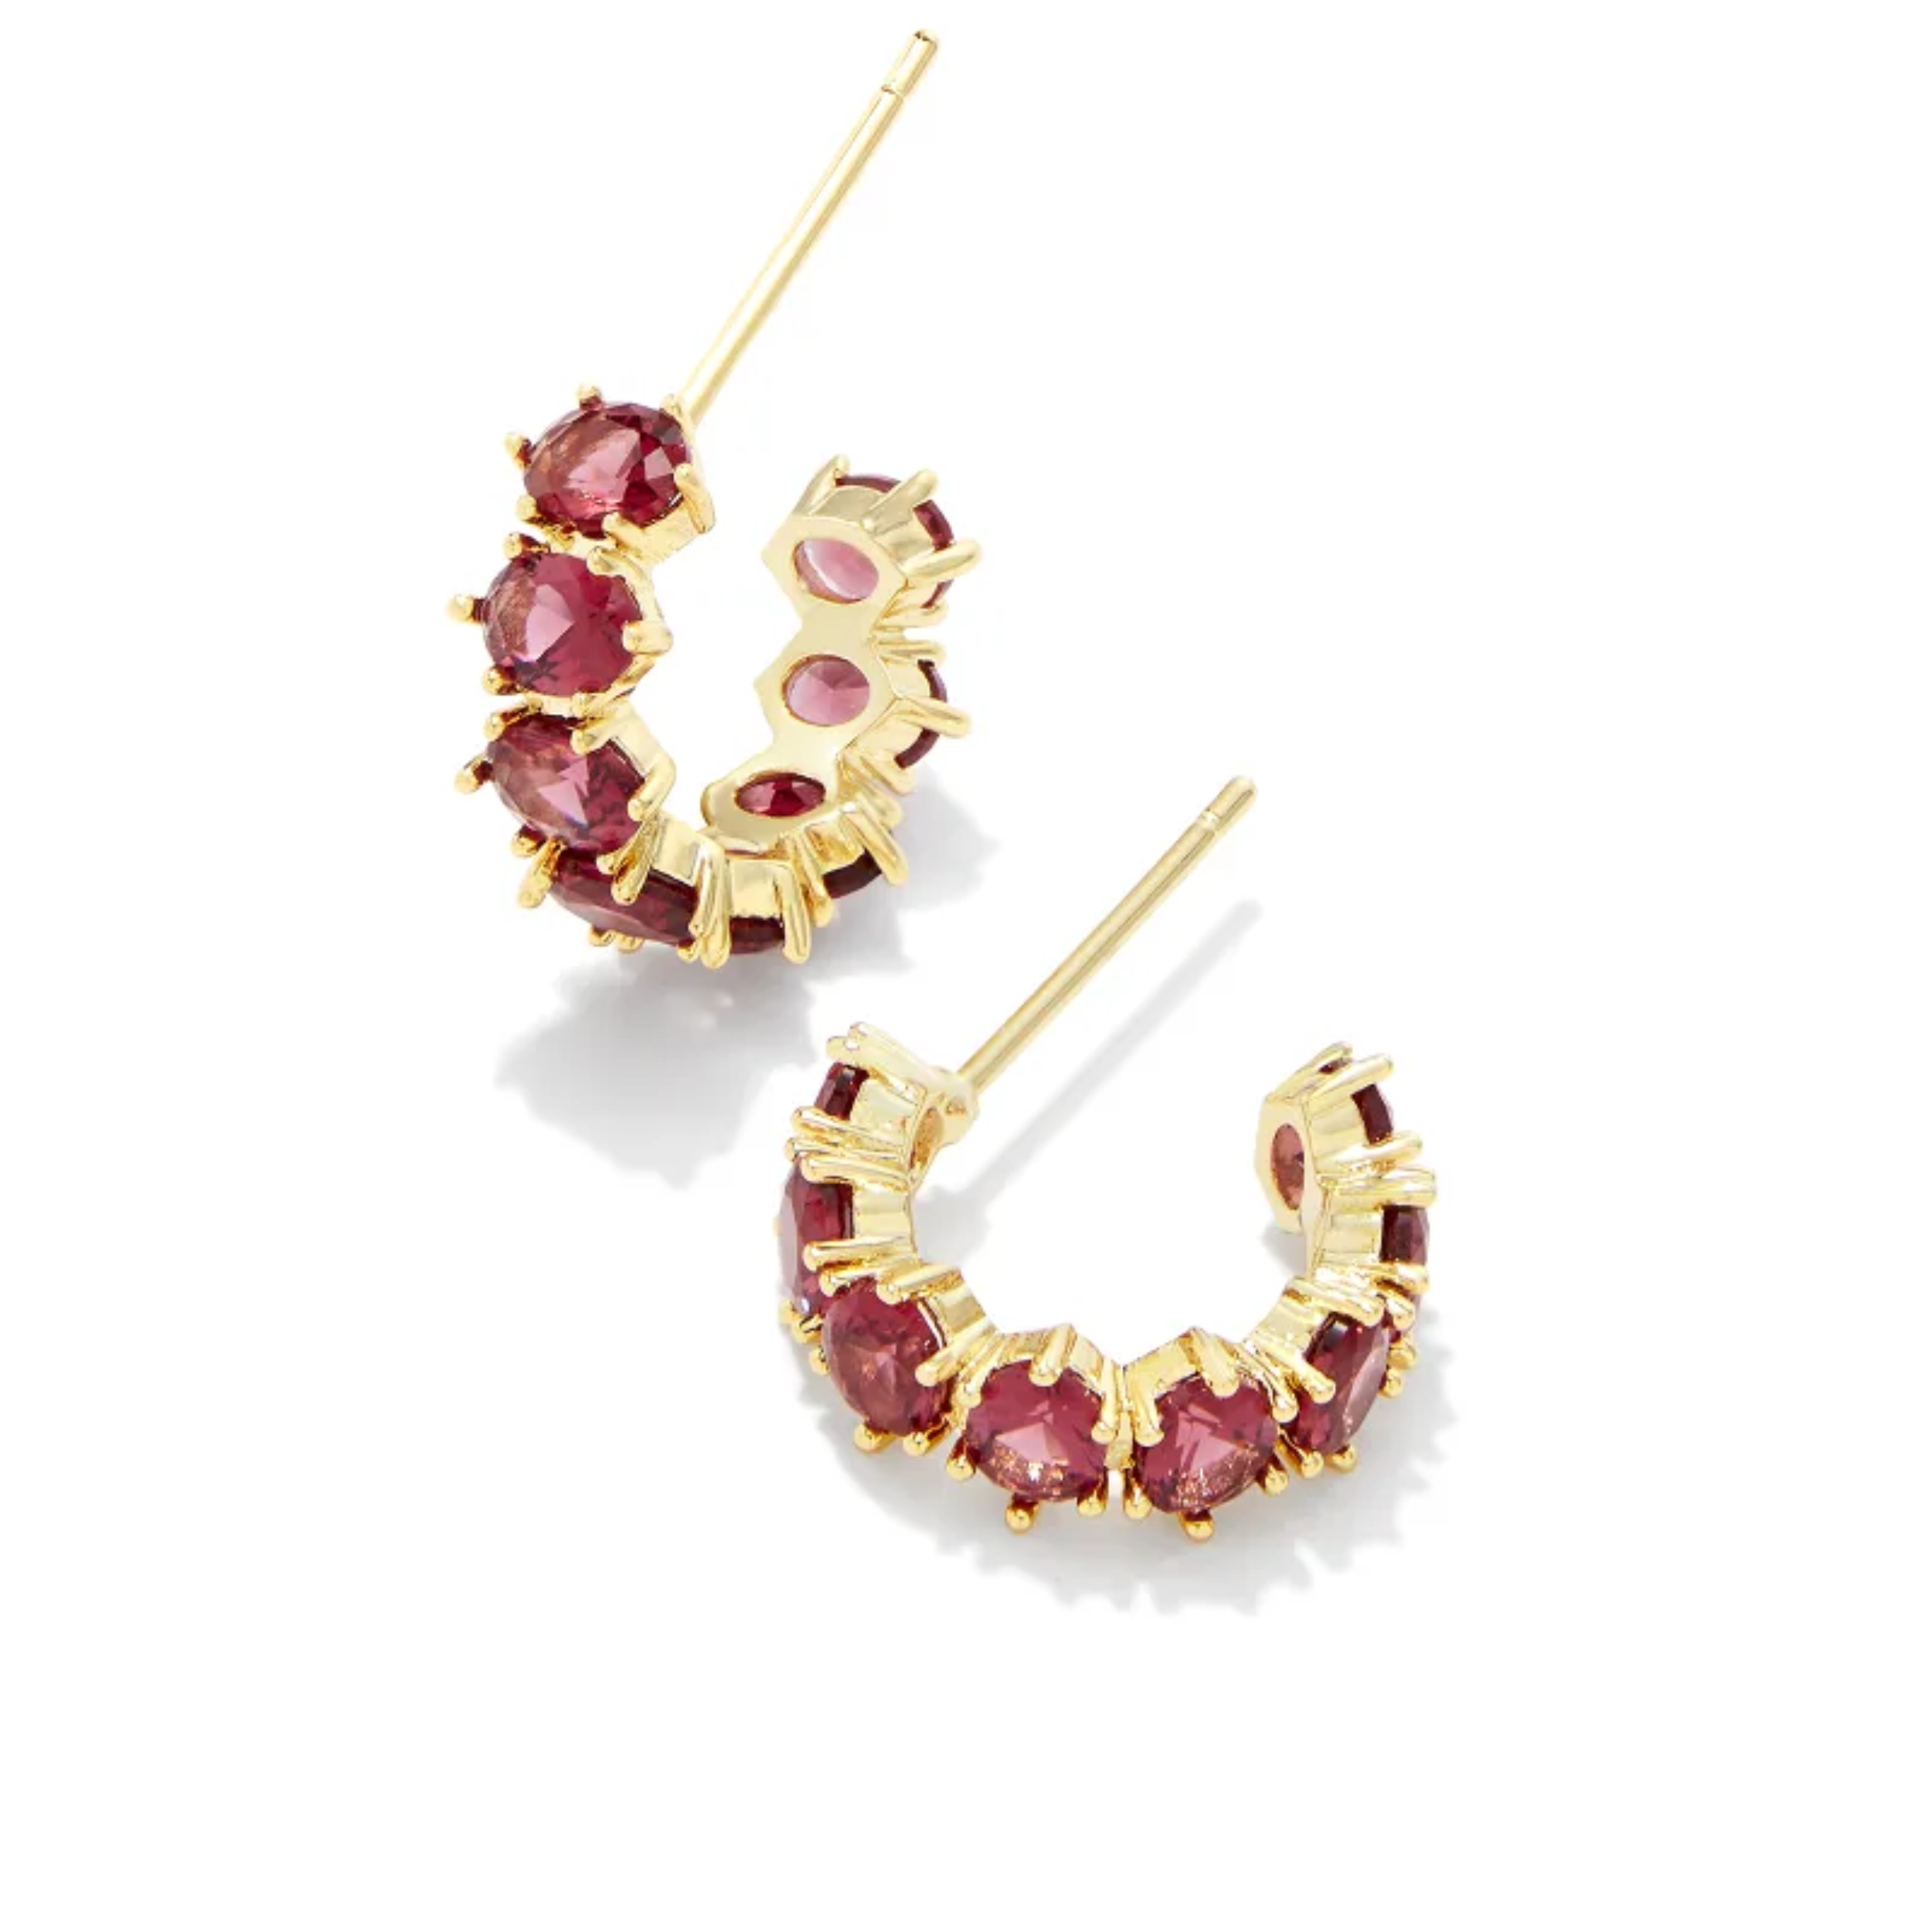 These Cailin Gold Crystal Huggie Earrings in Red Crystal by Kendra Scott are pictured on a white background.